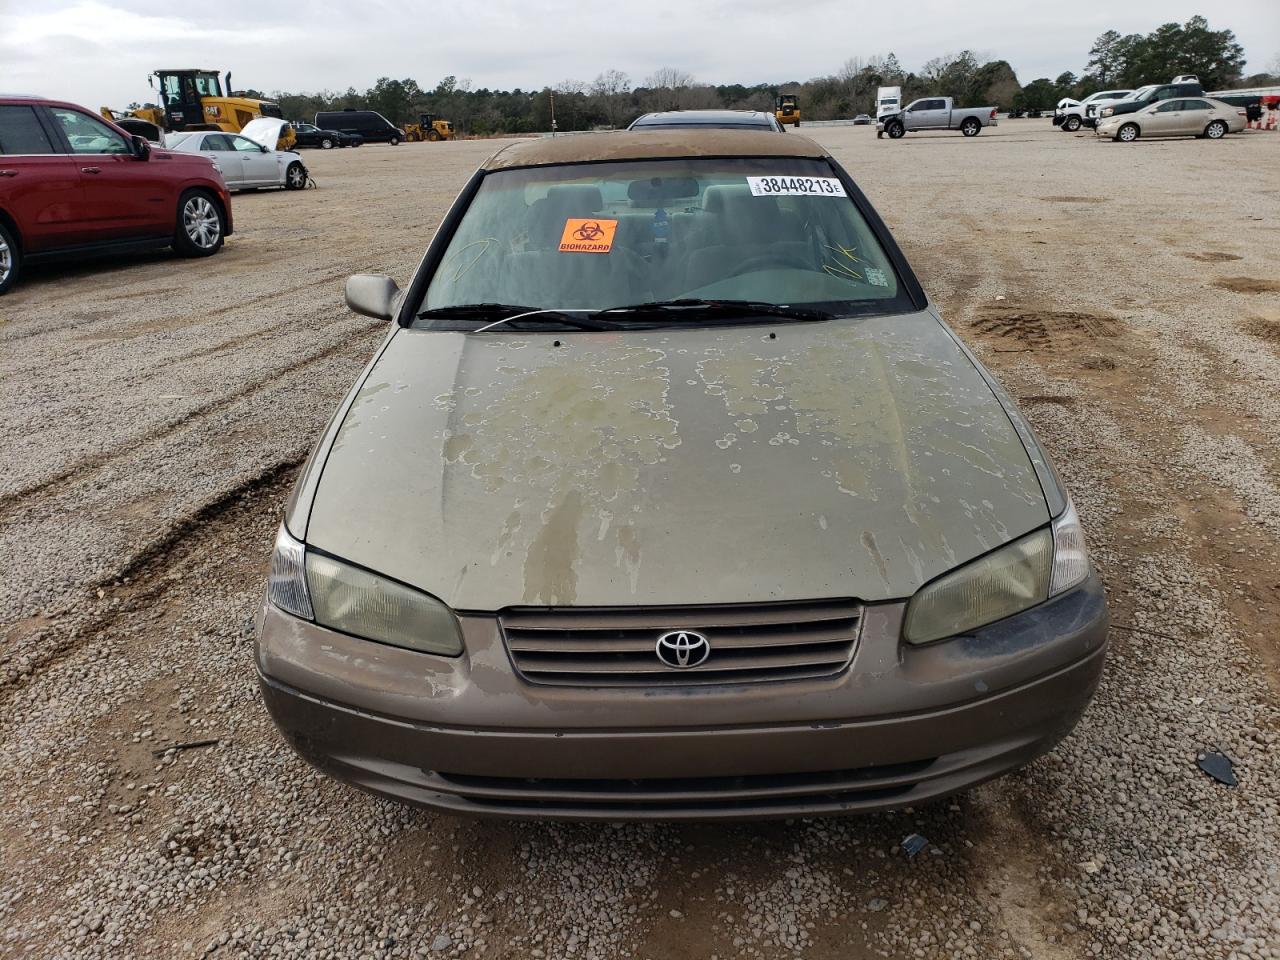 JT2BG22K7X0****** Used and Repairable 1999 Toyota Camry in Alabama State